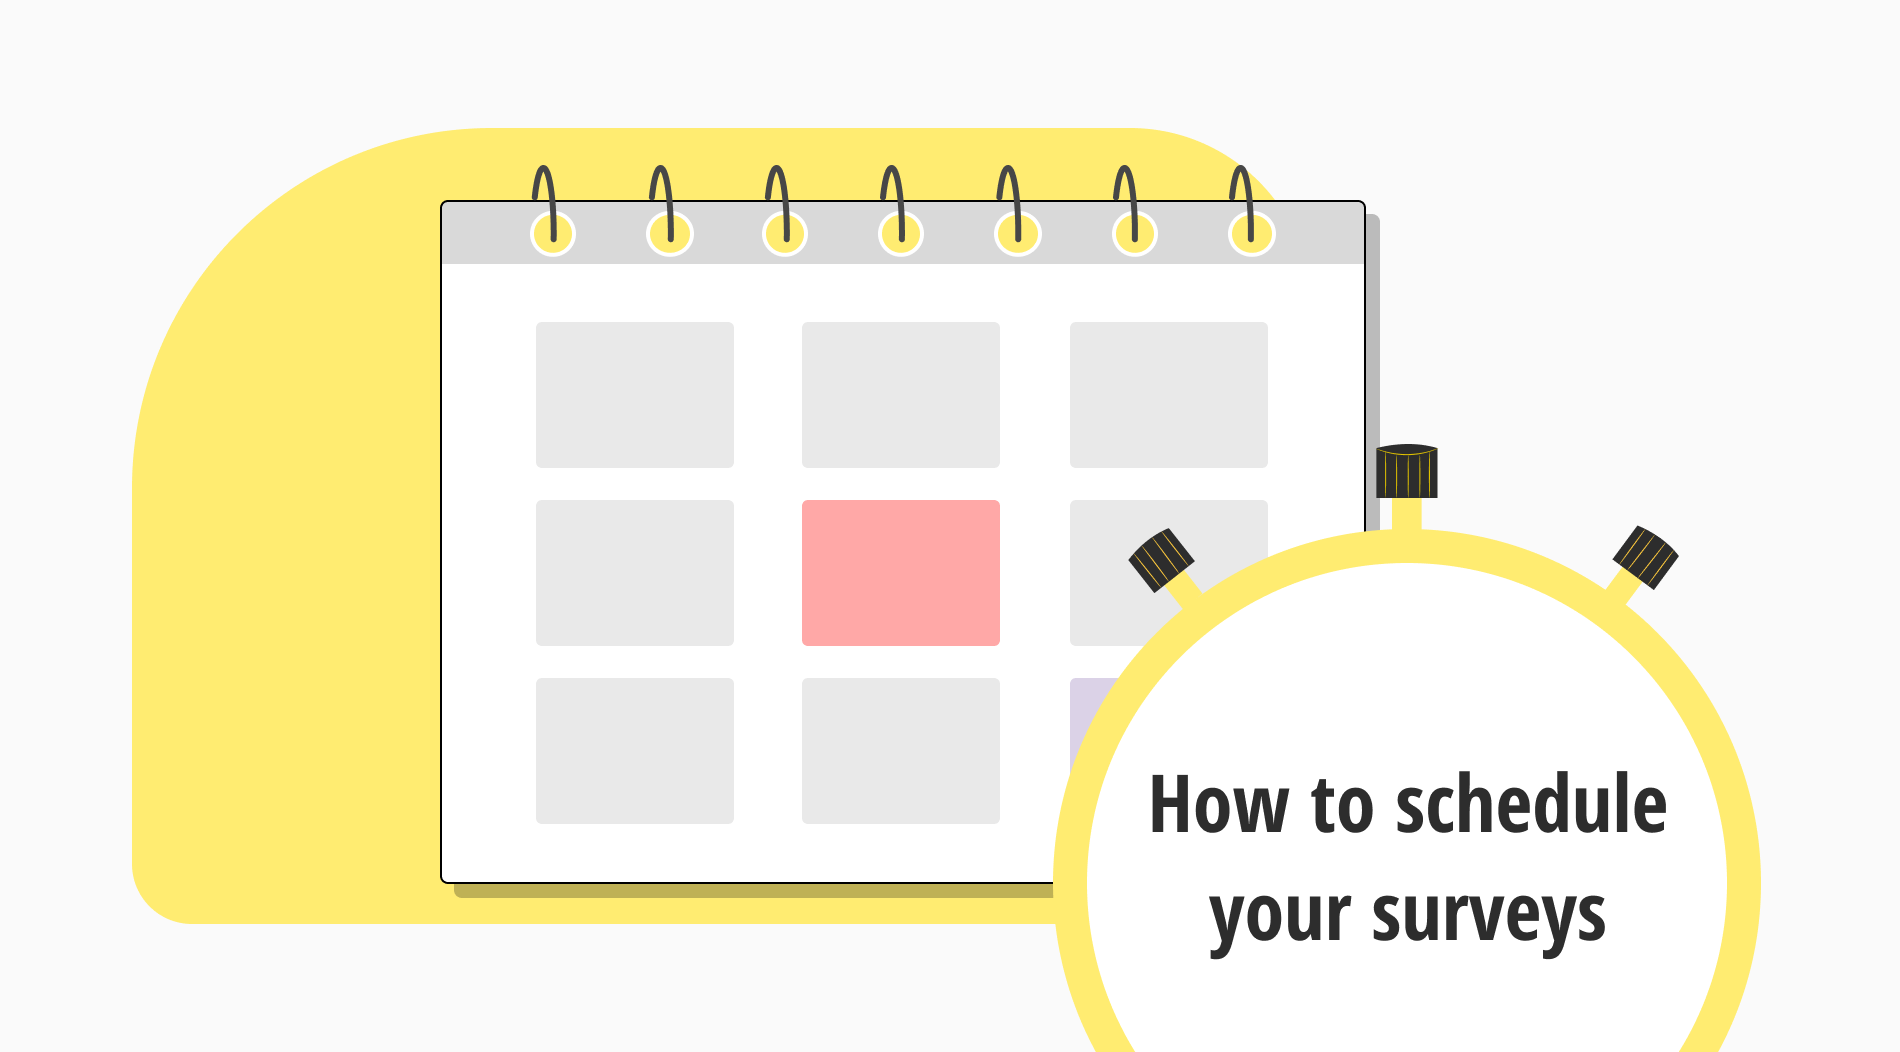 How to schedule your surveys for optimal results